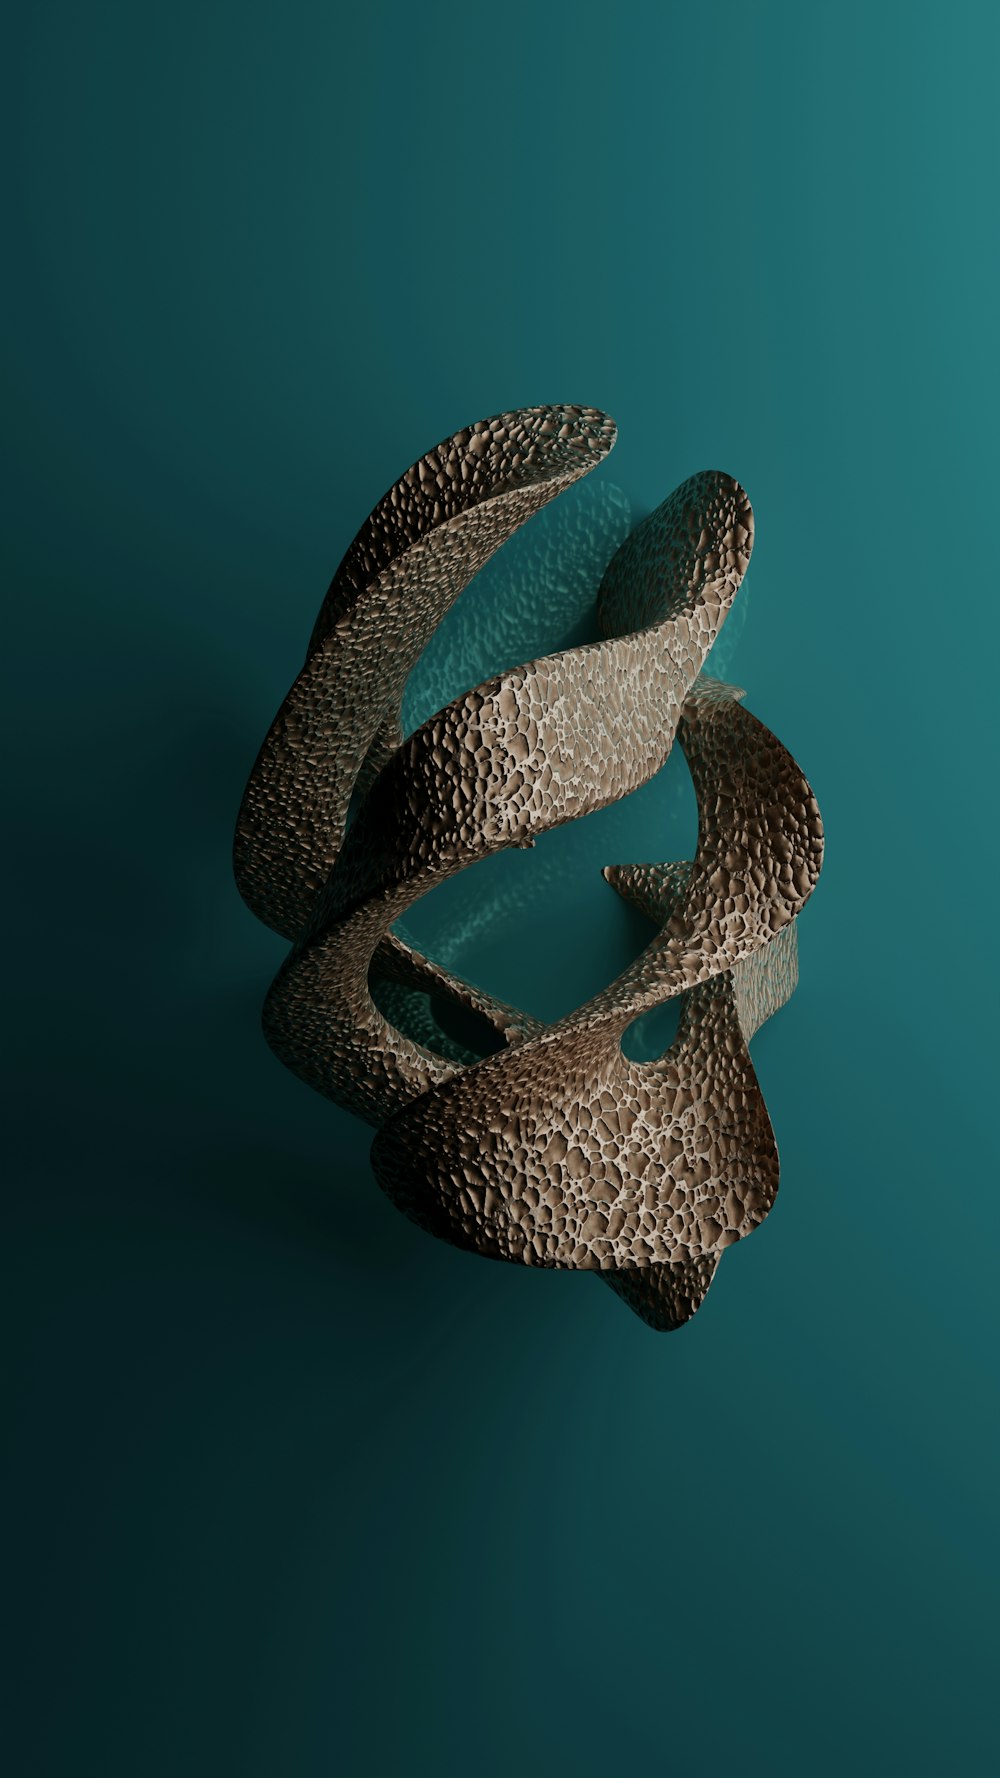 a sculpture of a snake on a blue background